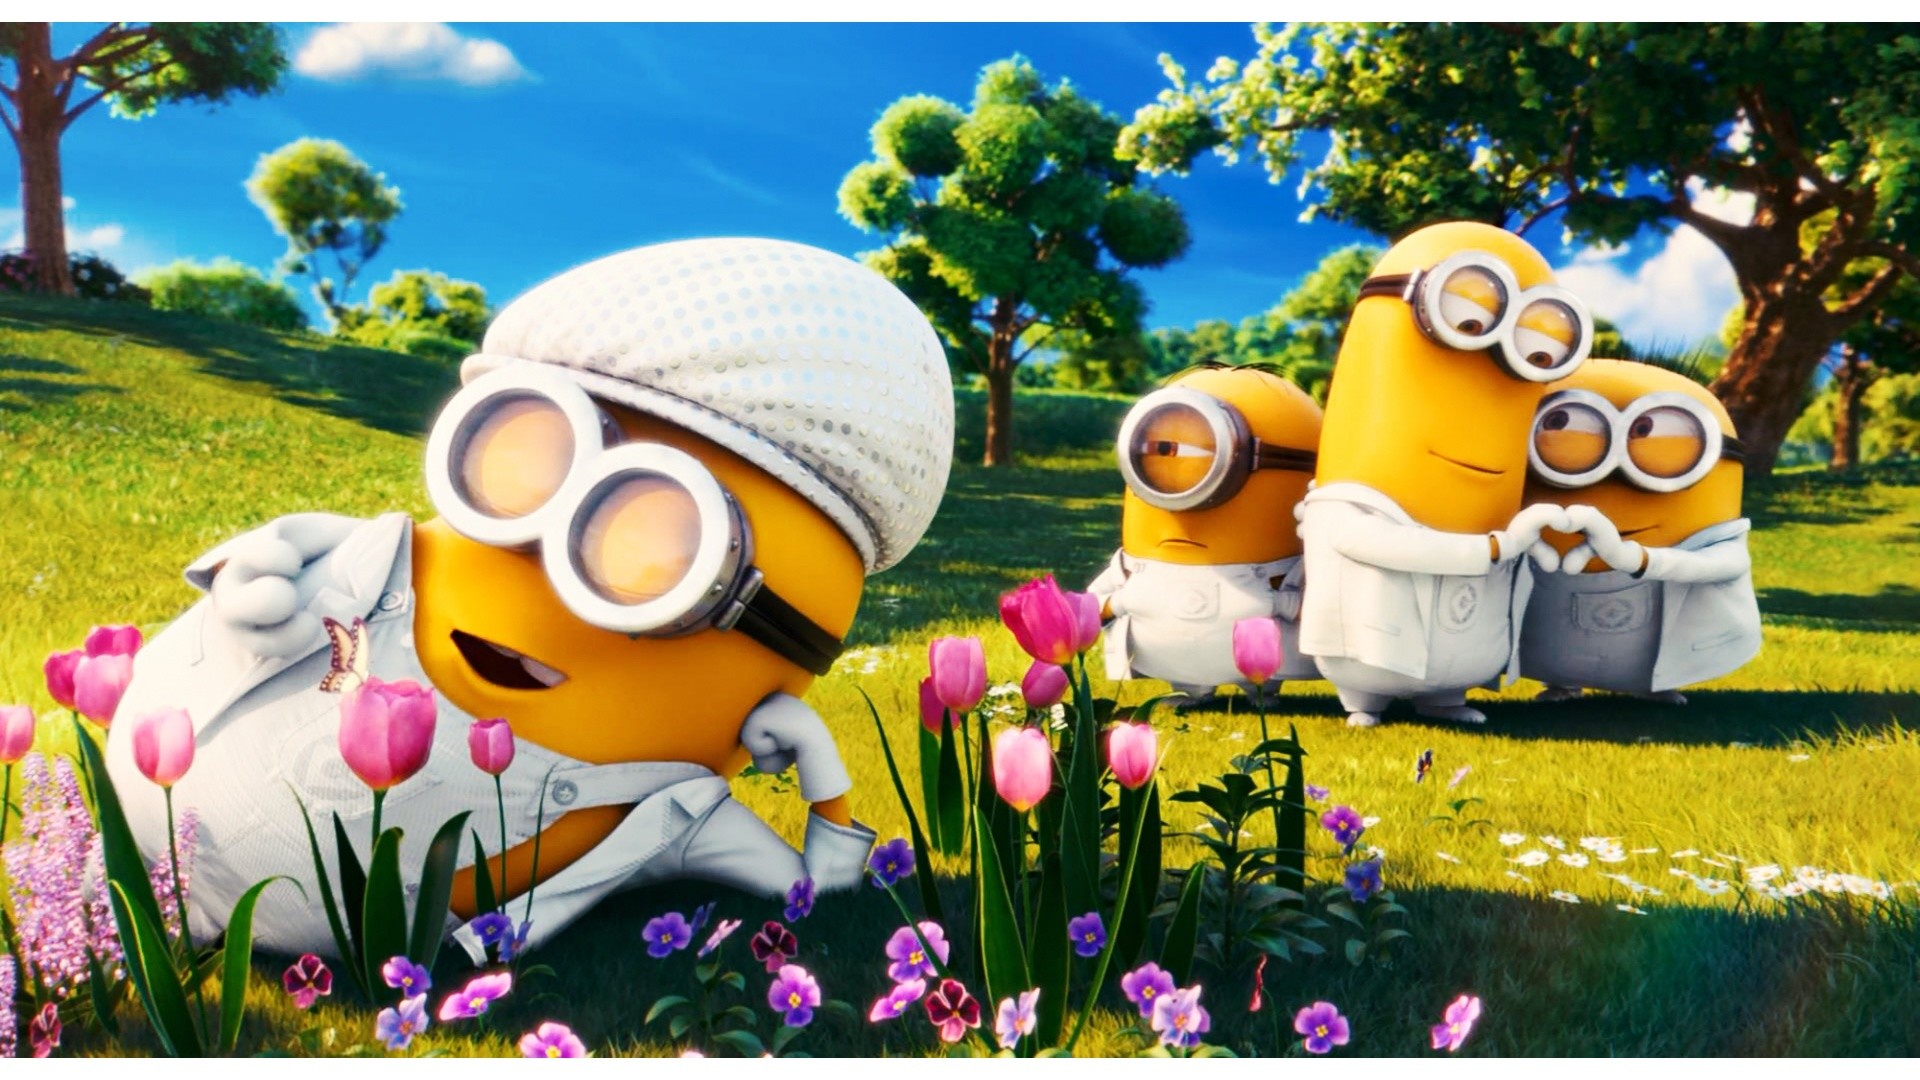 Bob The Minion In Coat Suit With Guns 4K HD Minions Wallpapers  HD  Wallpapers  ID 64790